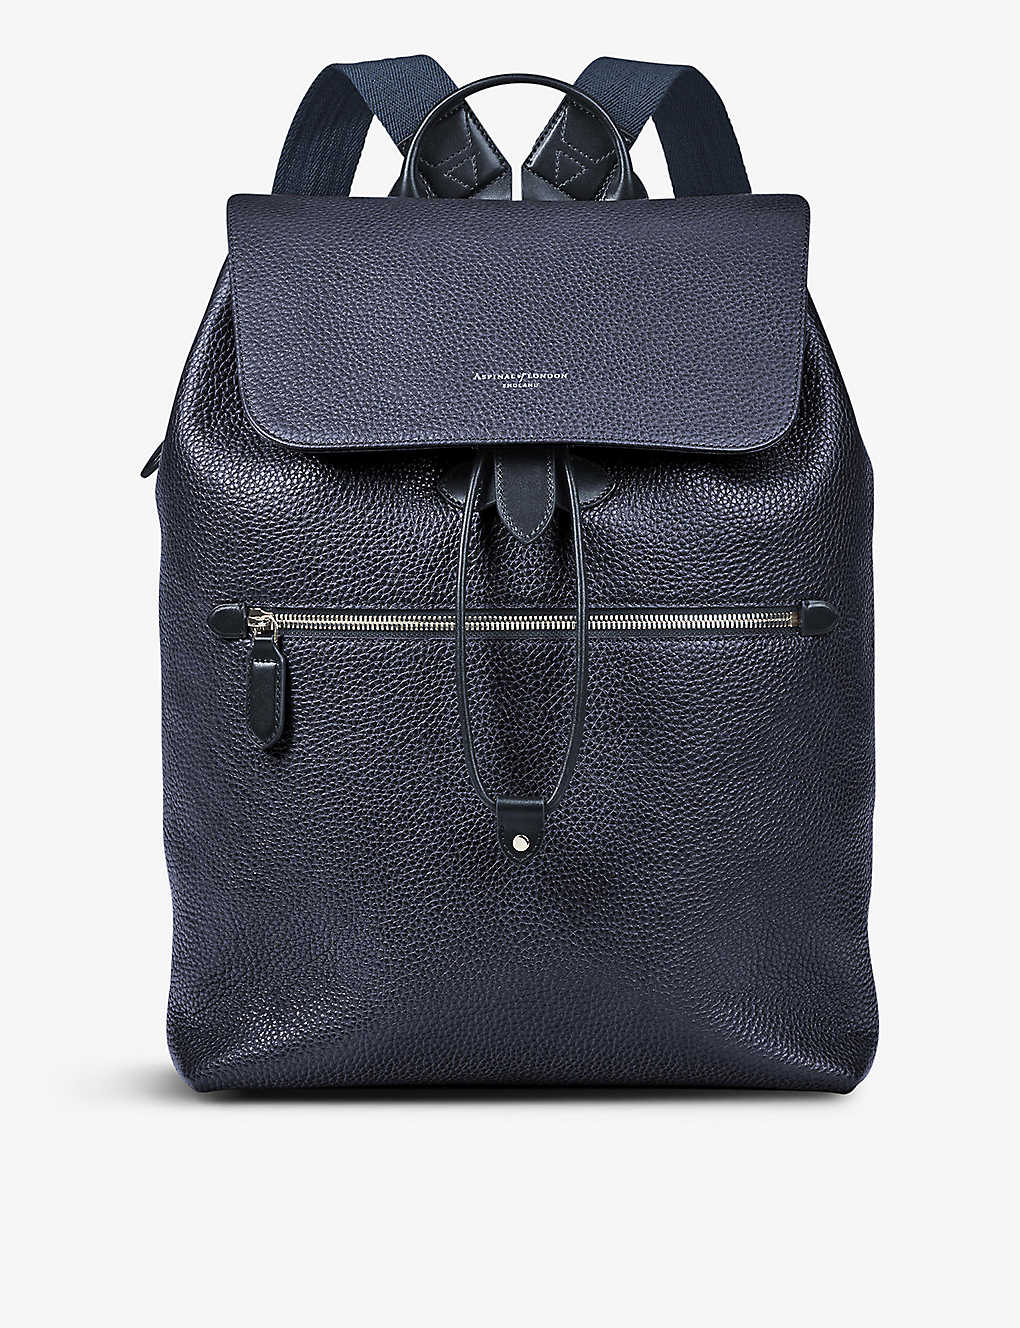 Aspinal Of London Womens Navy Reporter Grained Leather Backpack